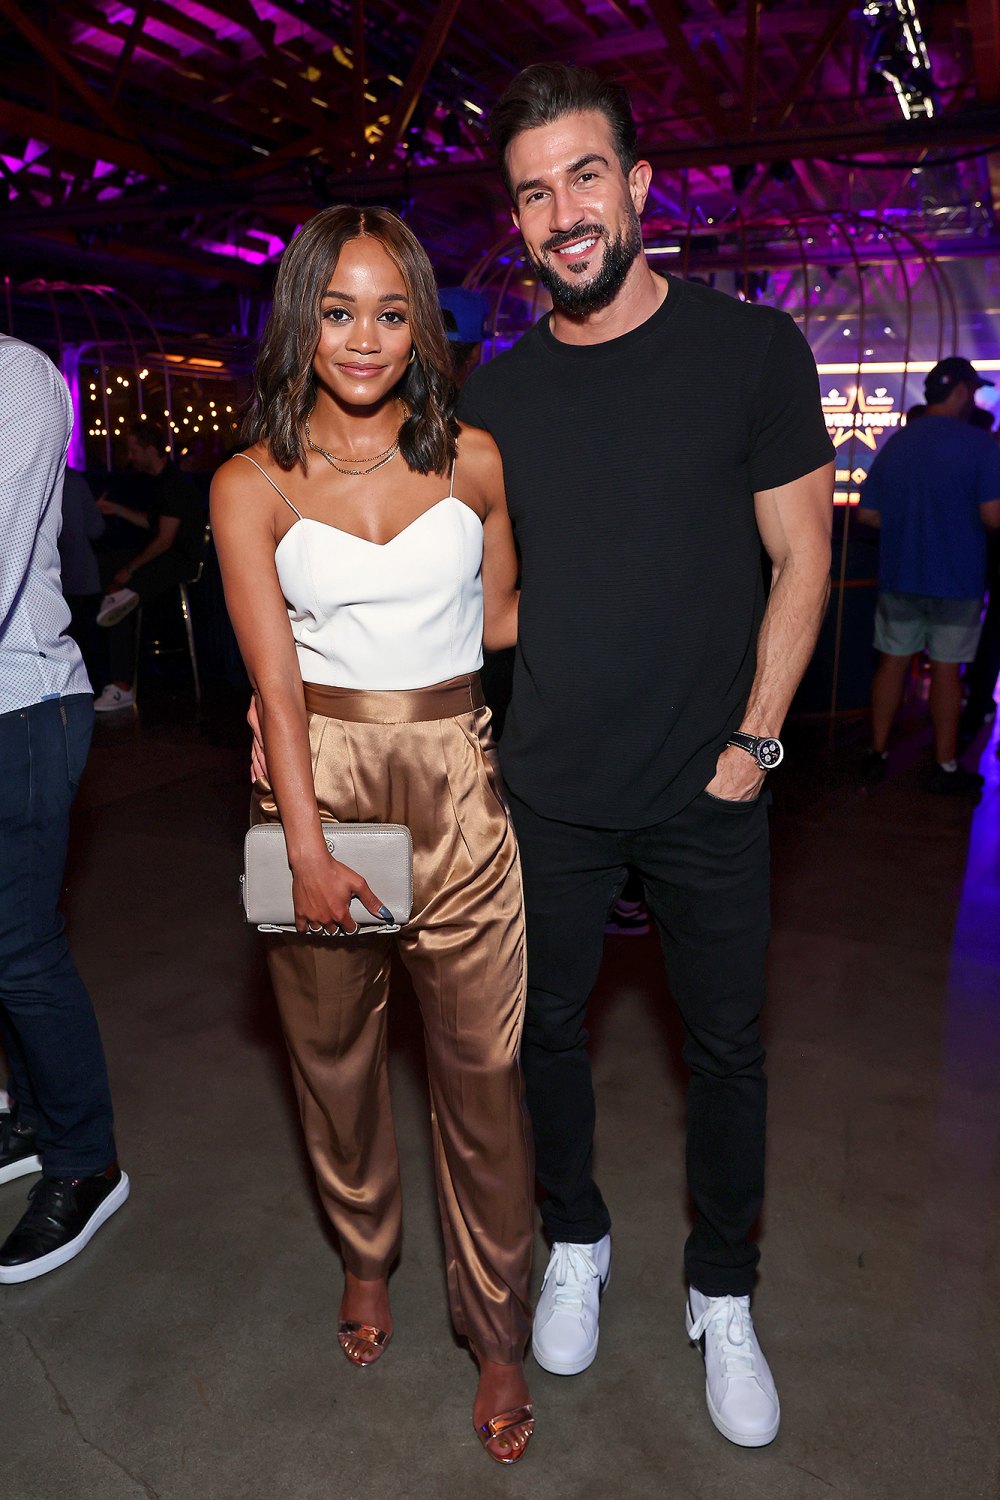 Rachel Lindsay Details Unglamorous Life With Bryan Abasolo: No Monthly Dates, Split Bills and More